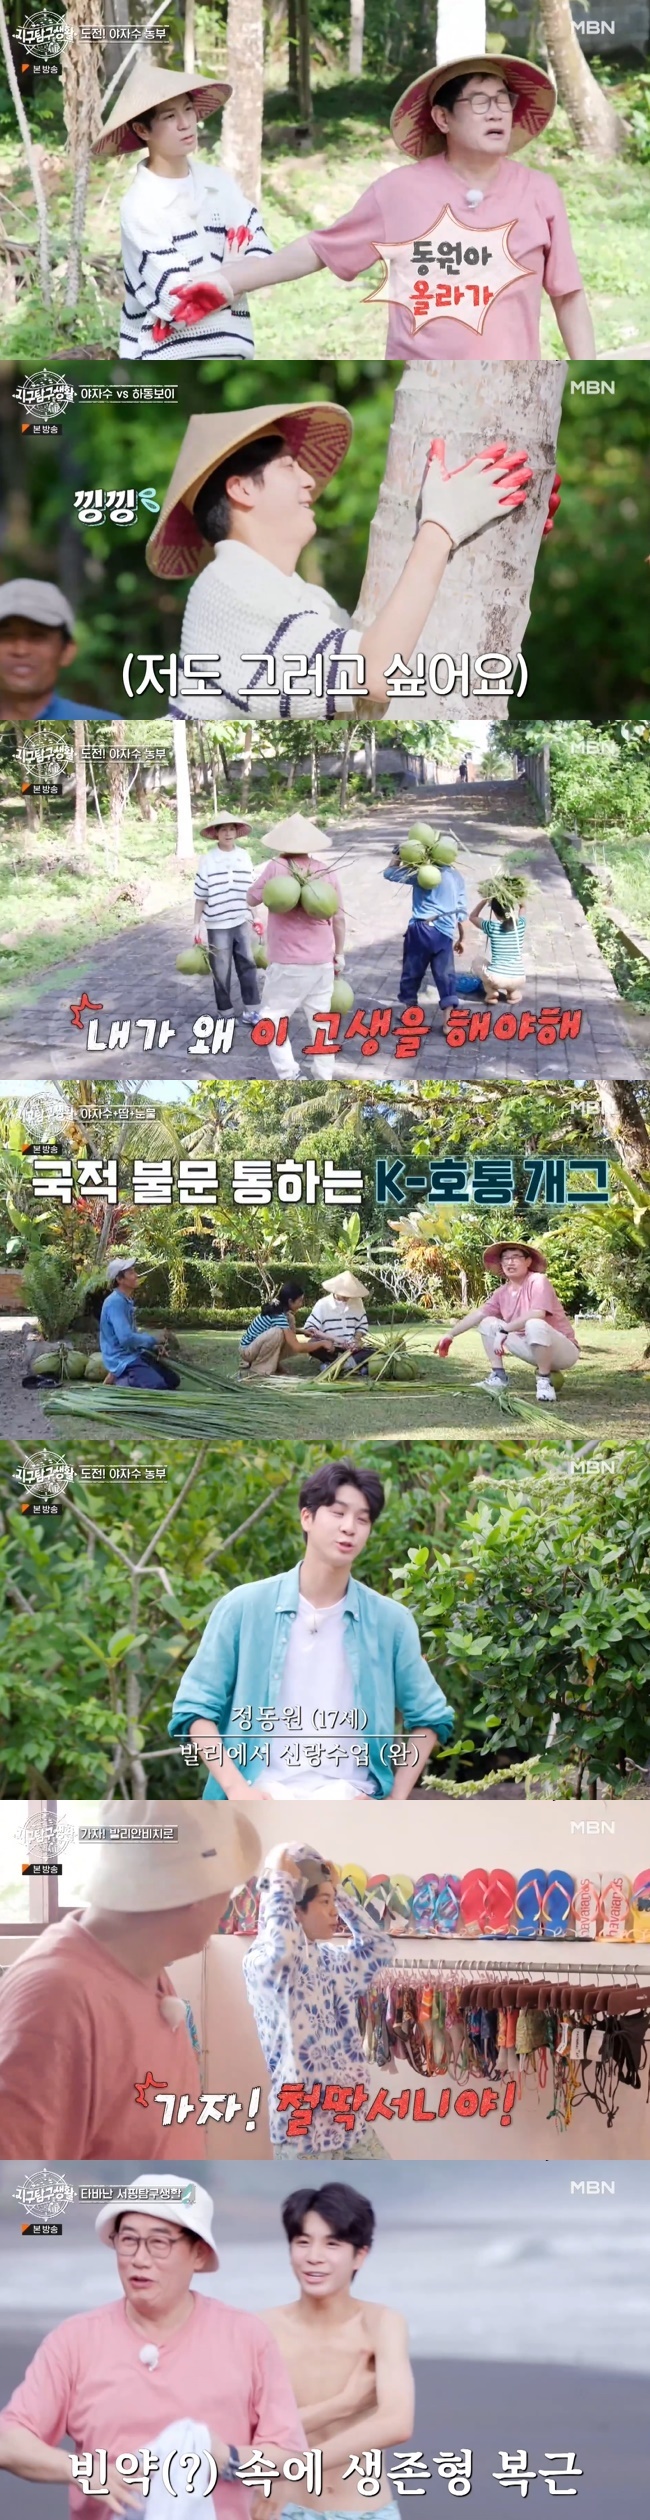 Lee Kyung-kyu left Jung Dong-won with bone advice.MBN  ⁇  earth exploration life  ⁇  broadcasted on June 6 revealed Lee Kyung-kyu and Jung Dong-won who experienced the tradition of Indonesia Bali.Early in the morning, after breakfast with the family, they went to the Heart of palm farm in front of Baro, where they climbed the tree and demonstrated the Heart of palm picking skillfully.Lee Kyung-kyu went up to Dongwon, I have to go up and work together. I went up when I was your age. I went up at the age of 15.Jung Dong-won, who started the Top Model inevitably, gave up that Baro  ⁇  was not really able to do this. Lee Kyung-kyu, frustrated, stepped up and climbed a little higher.Jung Dong-won, who had a desire to win, started his second Top Model, saying, Ill try that much, but eventually he slipped and was humiliated.After arranging the Heart of palm leaves with a knife, Lee Kyung-kyu and Jung Dong-won moved the harvested Heart of palm. Lee Kyung-kyu is irritating.I was annoyed that I had to do this hard work to make you a human being. The two helped the family to tie the Heart of palm leaves by type.When Jung Dong-won made a series of mistakes, Lee Kyung-kyu shouted, No, no, no, no, no, no, no, no, no, no, no, no, no, no, no, no, no, no, no.After all the work, Jung Dong-won harvests and sells coconuts and leaves in the Moy Yat Heart of palm. I think Ill get tired of doing things like Moy Yat.When I saw that I was living hard for my family, I felt that if I became the head of the family later, I would have to live hard with that spirit.Lee Kyung-kyu went to Balian Beach with Jung Dong-won, who said he wanted to surf.Jung Dong-won, who bought a swimsuit and a shirt at a swimsuit shop, was embarrassed to see his armpit at the instructors request to take off his T-shirt before a full-scale surfing class.Lee Kyung-kyu was surprised to see Jung Dong-wons survival-type abs unexpectedly revealed.Jung Dong-won, who was frightened by the cold waters and waves, was a top model for continued failures and succeeded in surfing properly on the board.After returning to the hostel after the glow, Jung Dong-won wrote a journal of inquiry.Lee Kyung-kyu said to Jung Dong-won, If I had been born here, would I have been able to ride that Heart of palm? I asked Gaya, saying, You have been singing since you were 15 years old.When Jung Dong-won proudly said, Its been four years since I debuted, Lee Kyung-kyu laughed and said, Its been 40 years since I debuted.Jung Dong-won asked, Can I do this when Im older? Lee Kyung-kyu said, Can you work until my age?If you can not keep up with your mind, you have to sing until my age. Its a start.Lee Kyung-kyu made three kinds of bibim ramen and soup ramen for Jung Dong-won and other family members.Lee Kyung-kyu was delighted to see Jung Dong-won and his family members inhaling without a mind.